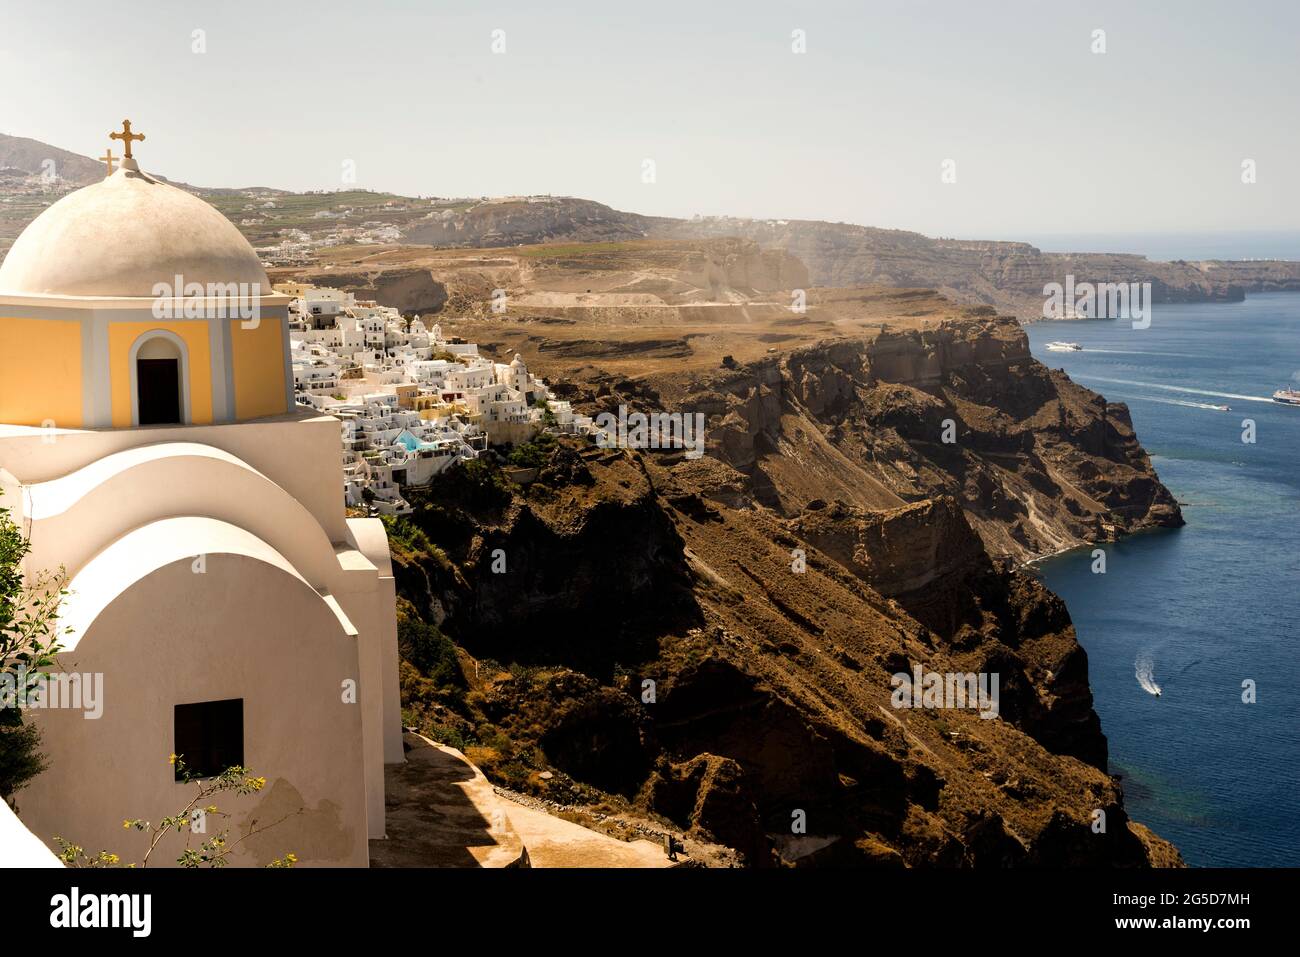 Domed church built on a cliff over the Santorini caldera in the Cycladic vernacular architectural style, Greece. Stock Photo